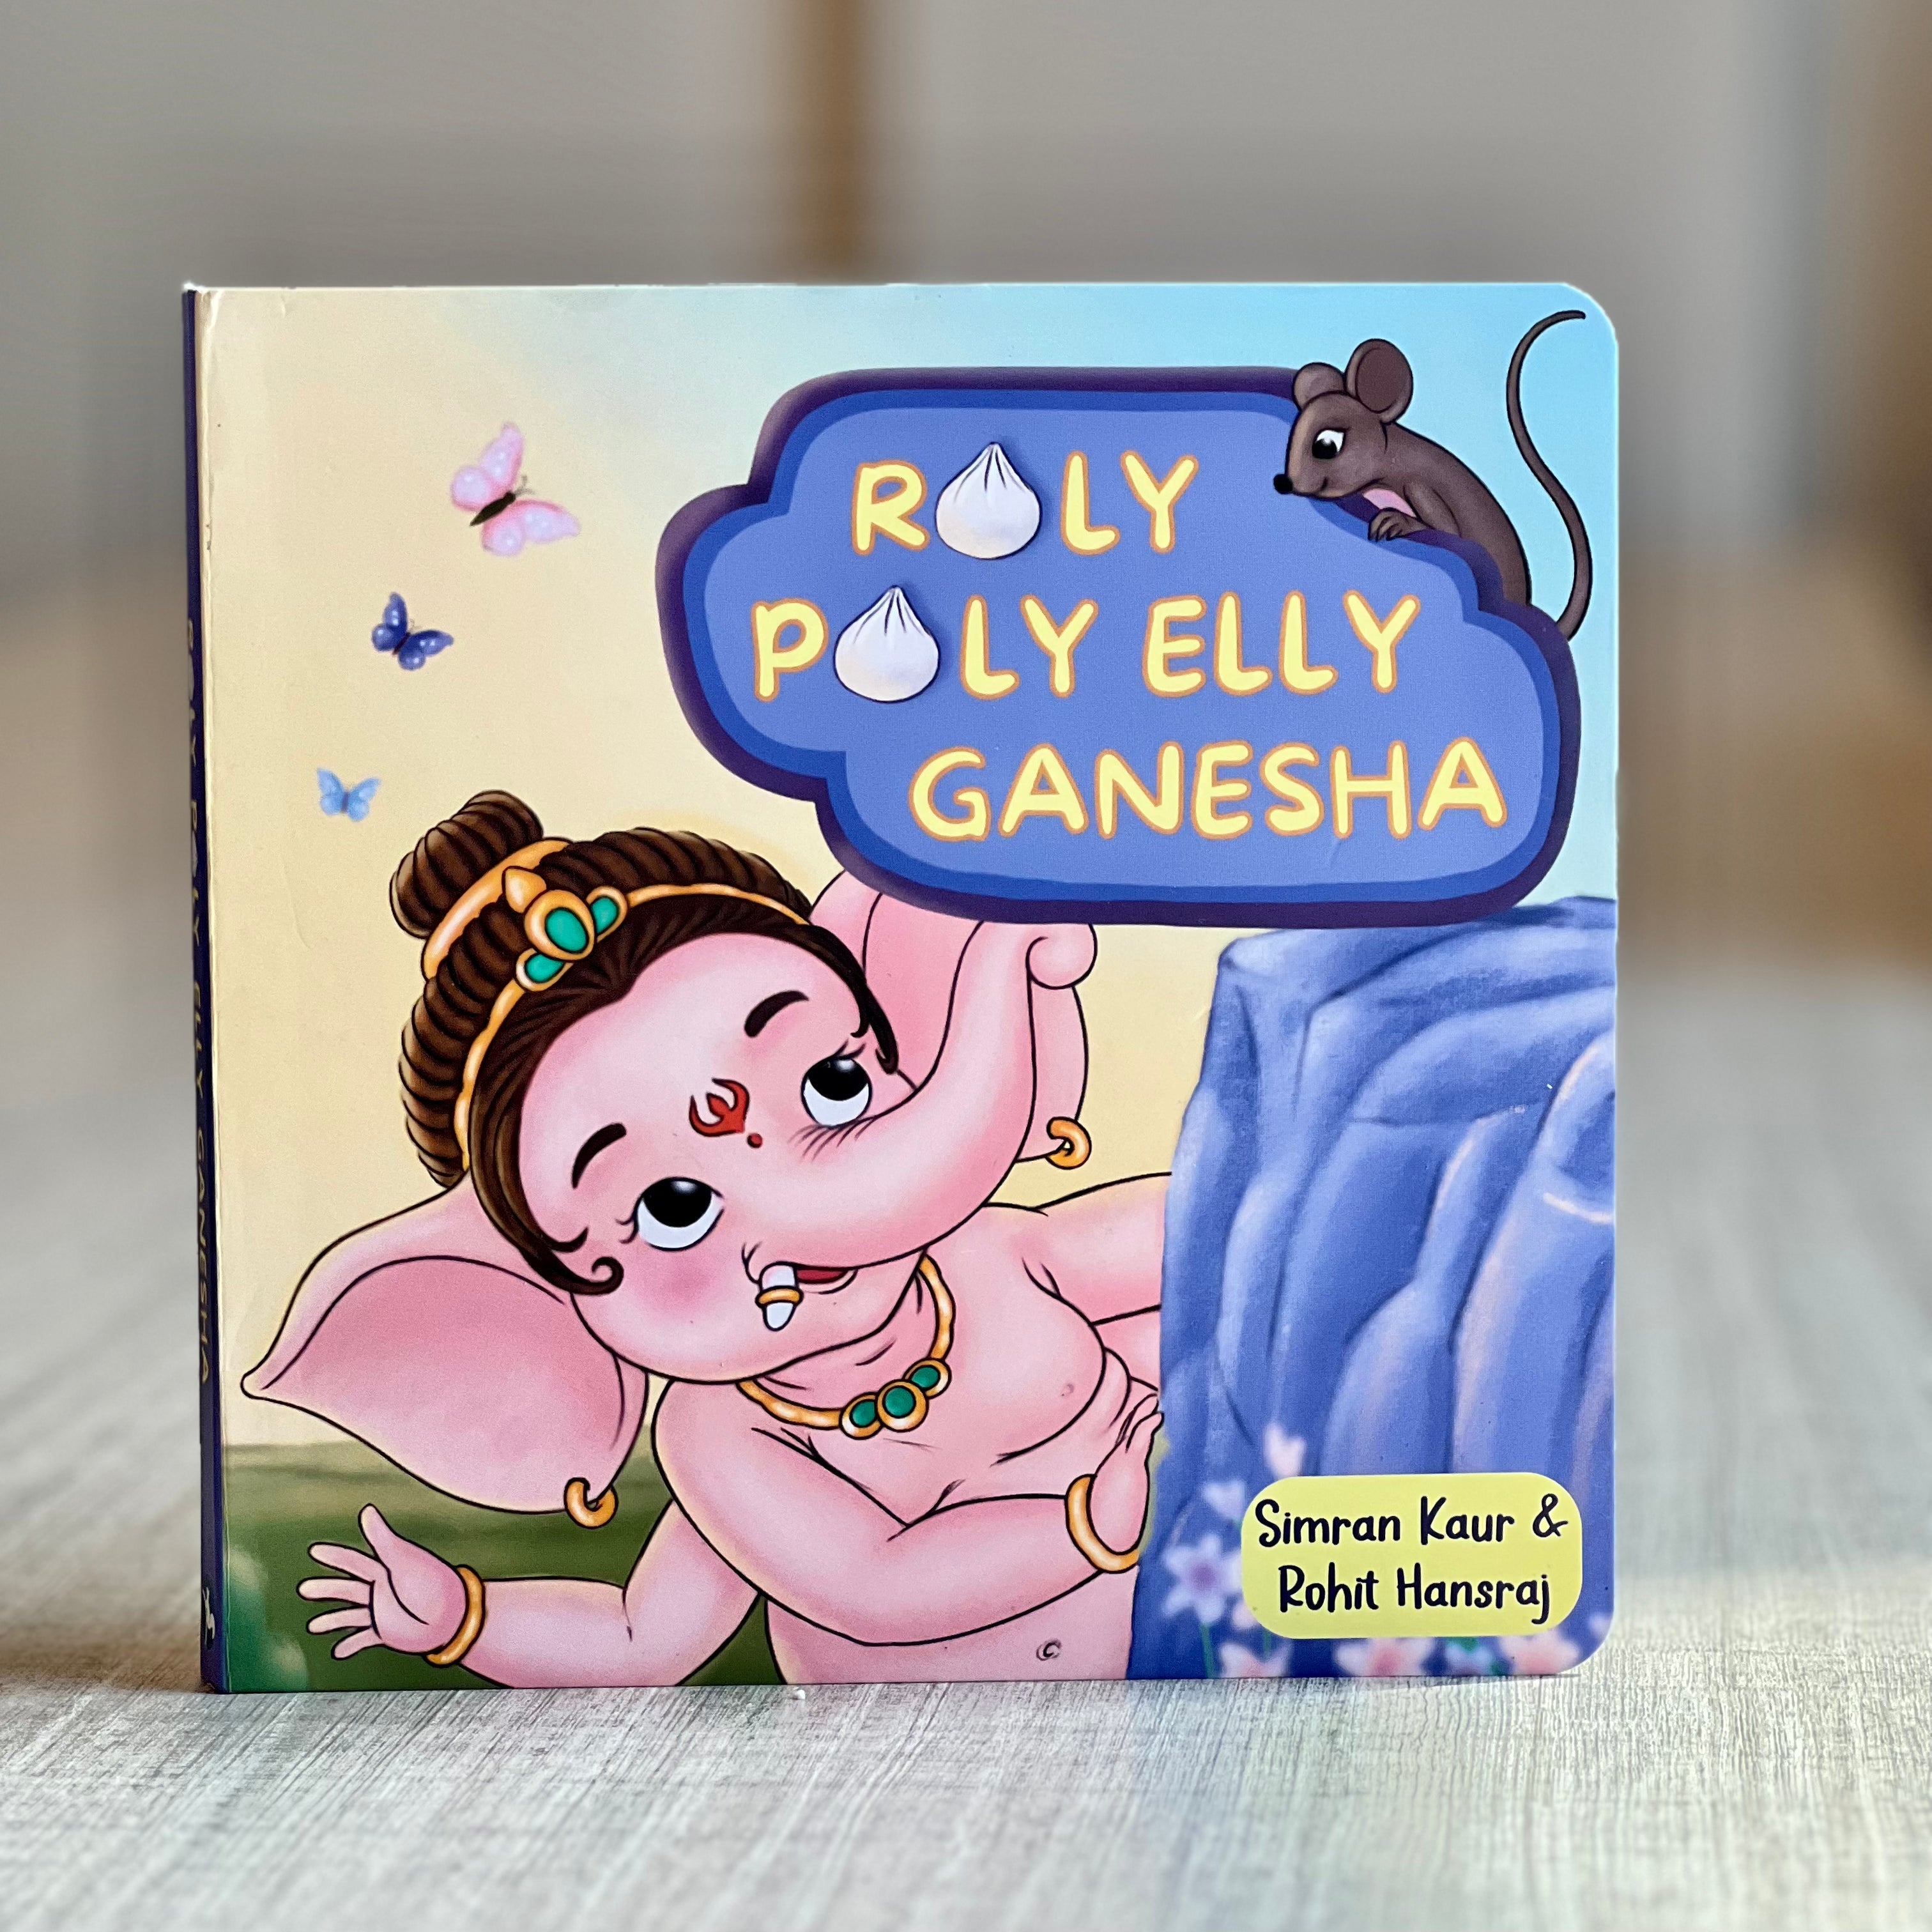 Little God Combo - Roly Poly Elly Ganesha: The Little God Story Book + The Little Gods Sticker Booklet